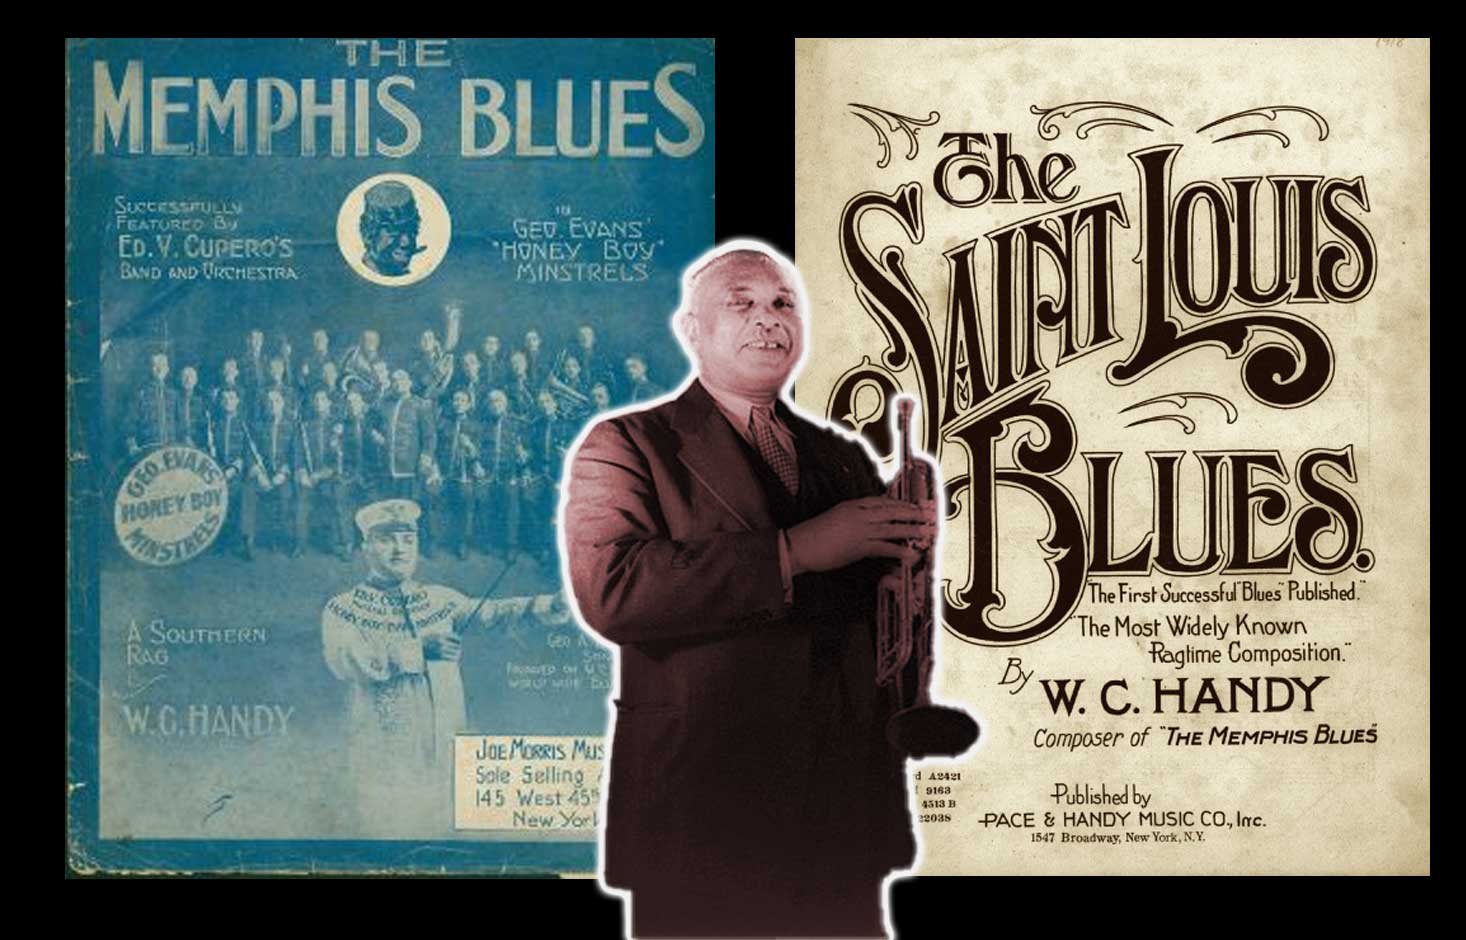 W.C. Handy, composer of Memphis and St.Louis Blues